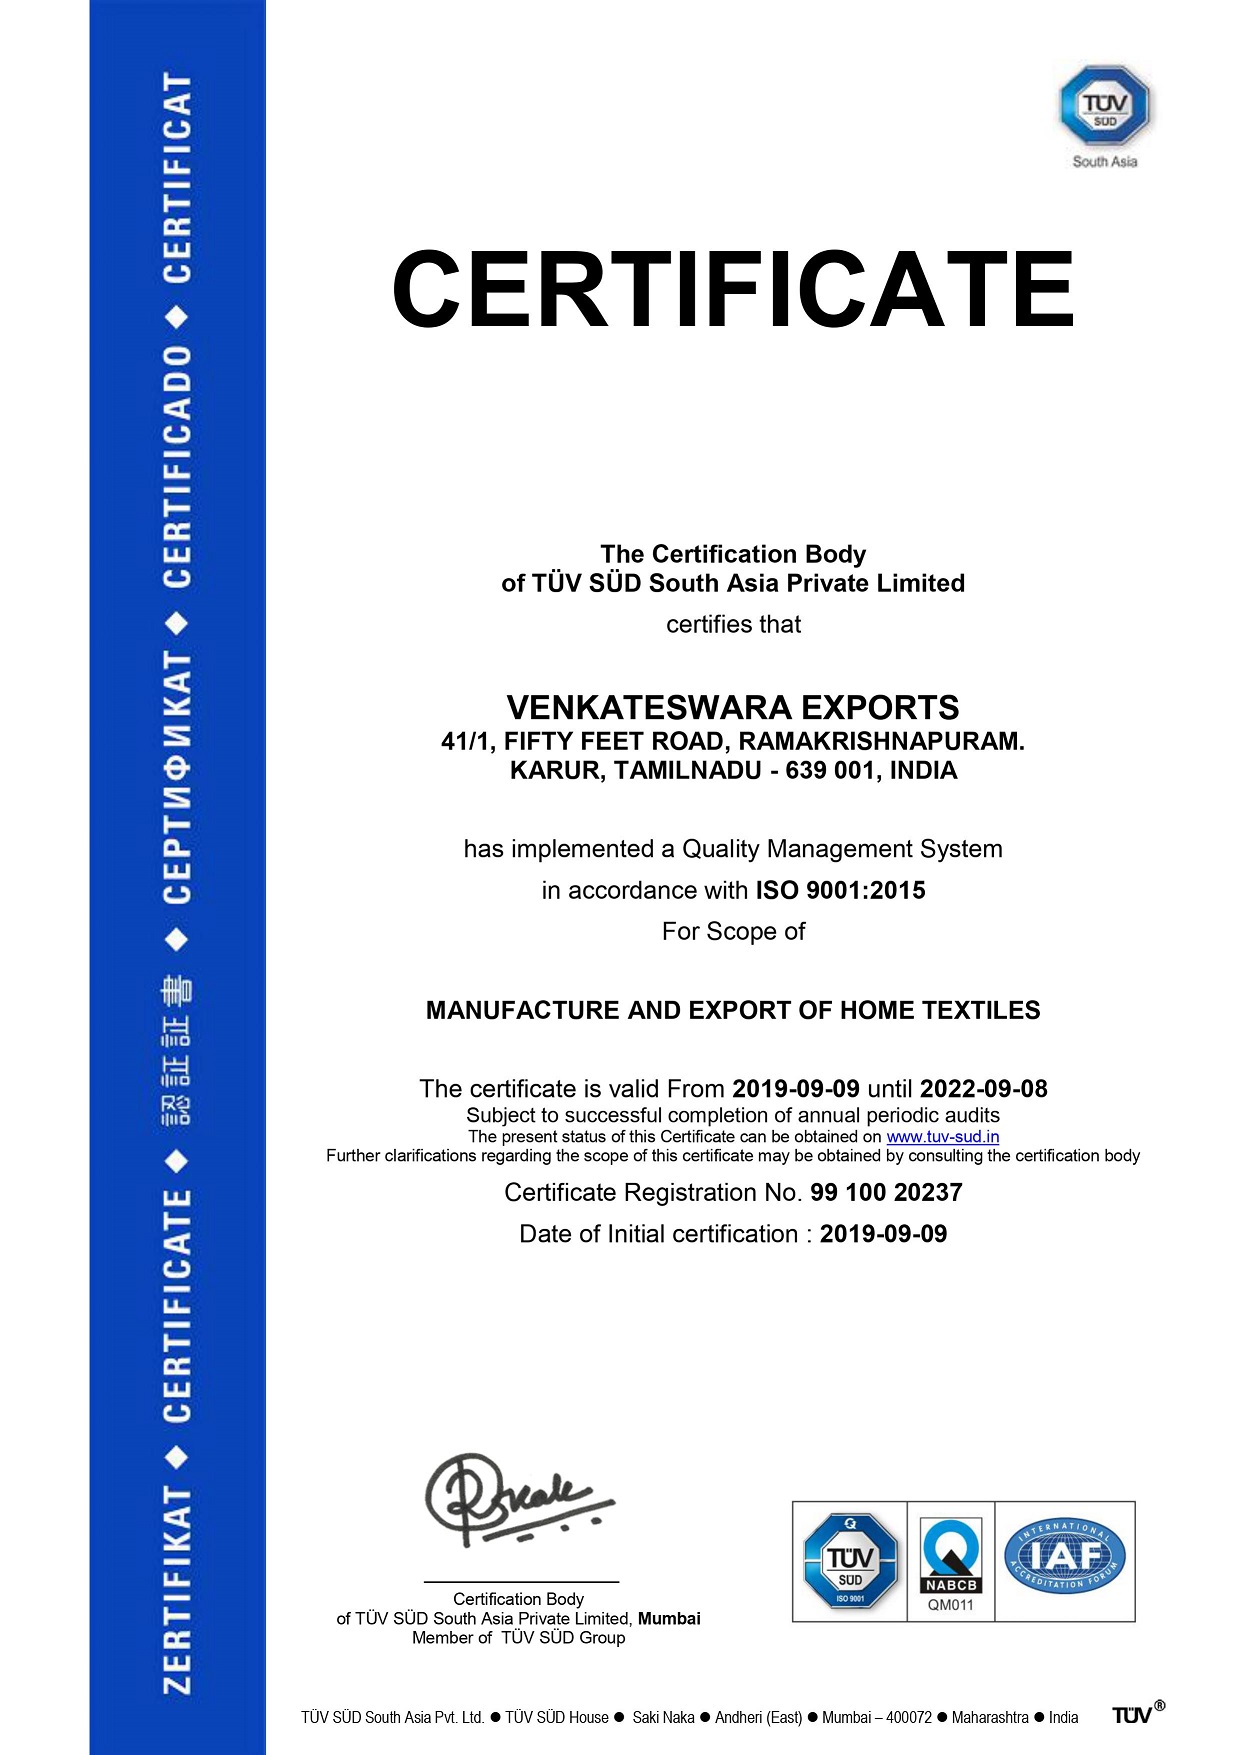 ISO 9001:2015 certified company by TUV SUD